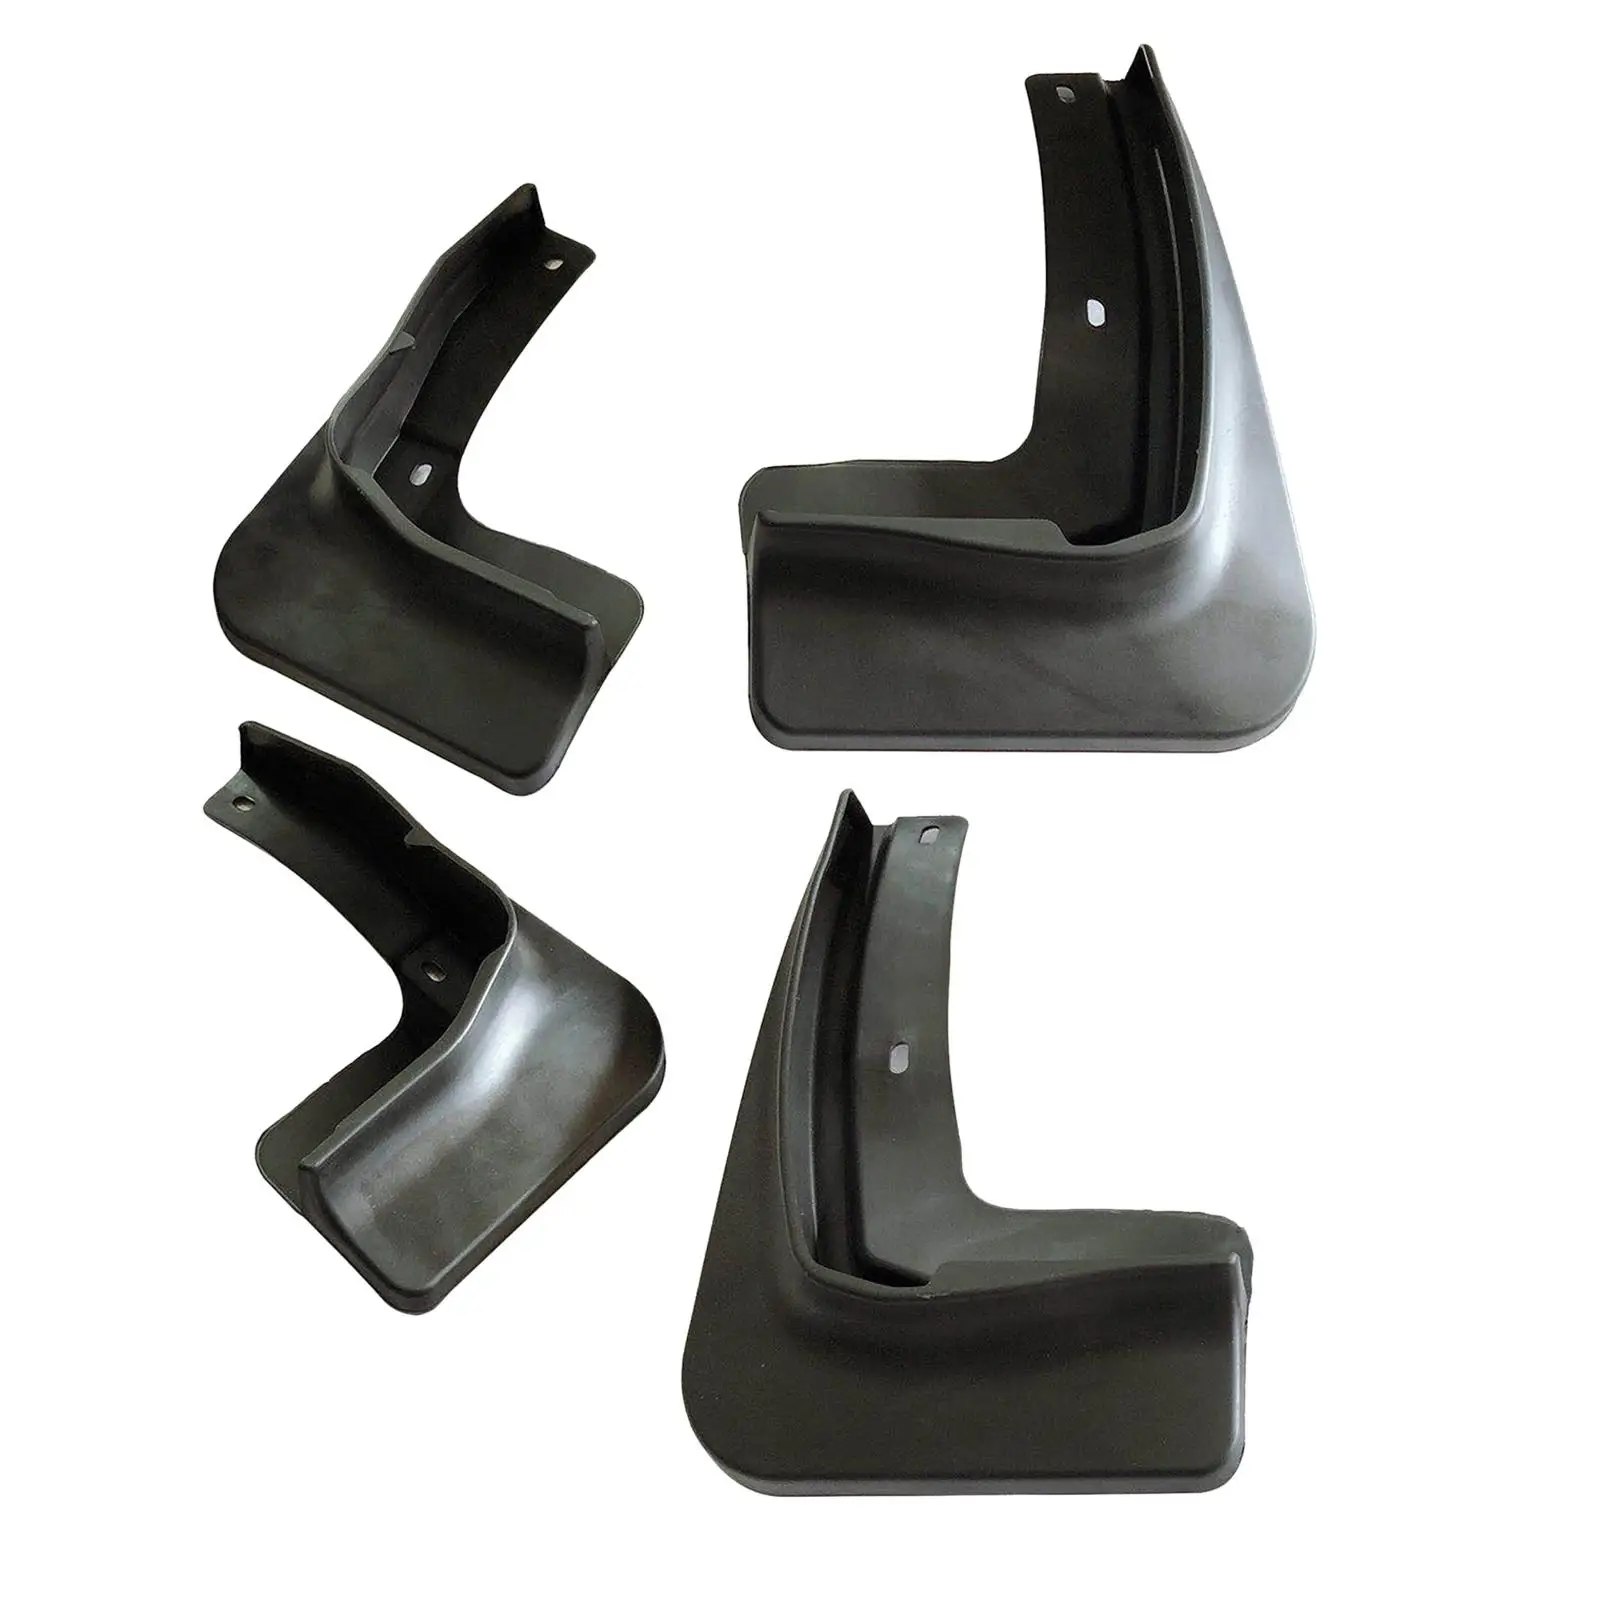 4x Car Mudguard Muds Flaps Durable Easy to Install Professional Fenders Accessories Portable Replacement for Byd Yuan Plus